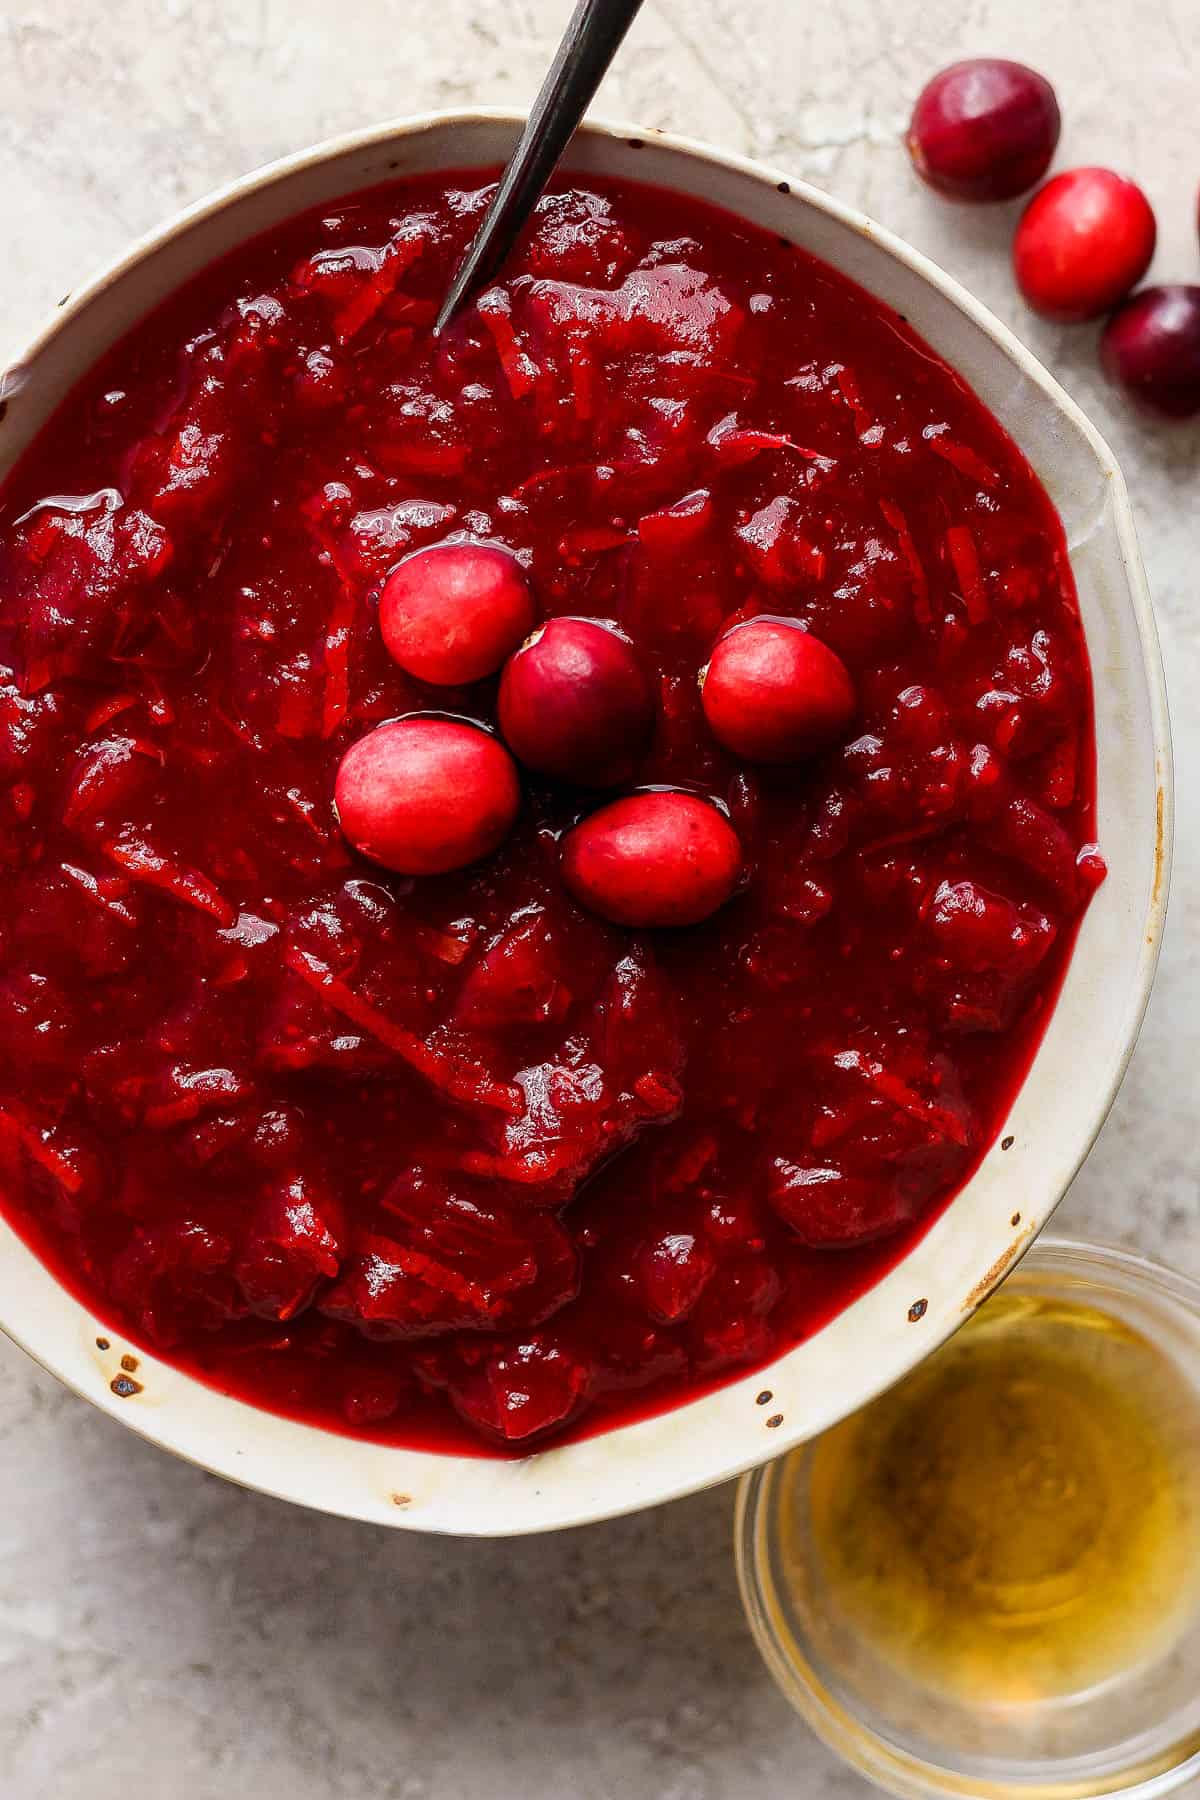 Bourbon cranberry sauce in a serving bowl on a table.